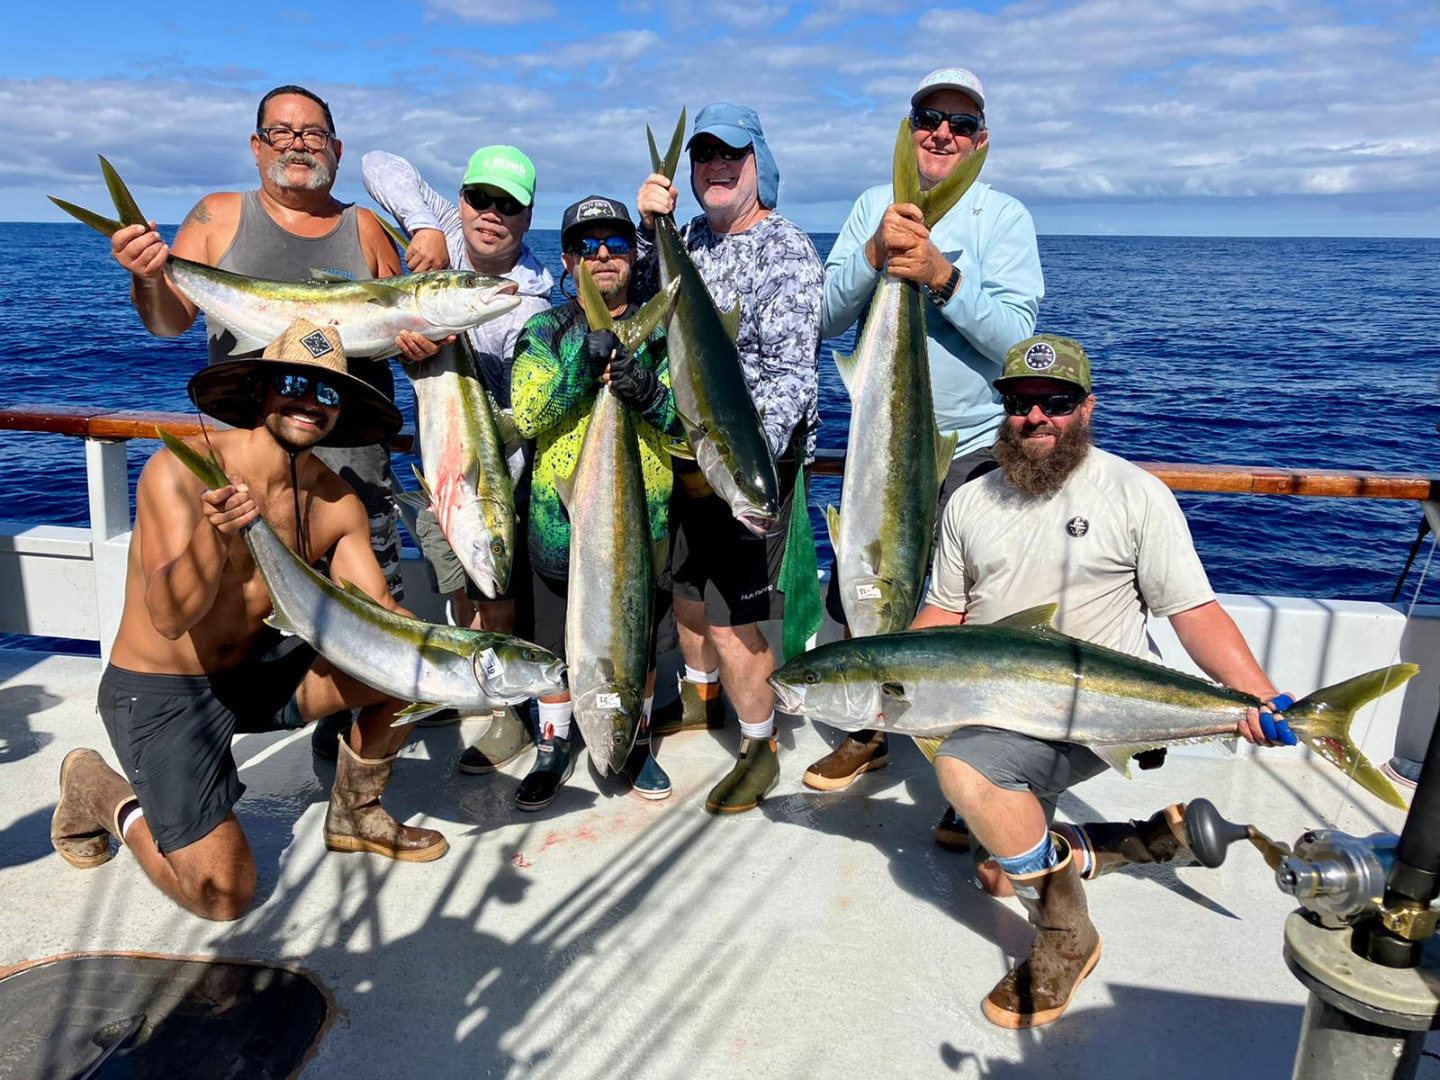 Independence Fish Report - TRIP 22-28 UNITED COMPOSITE/BUBBA FISHING  UPDATE - September 16, 2022